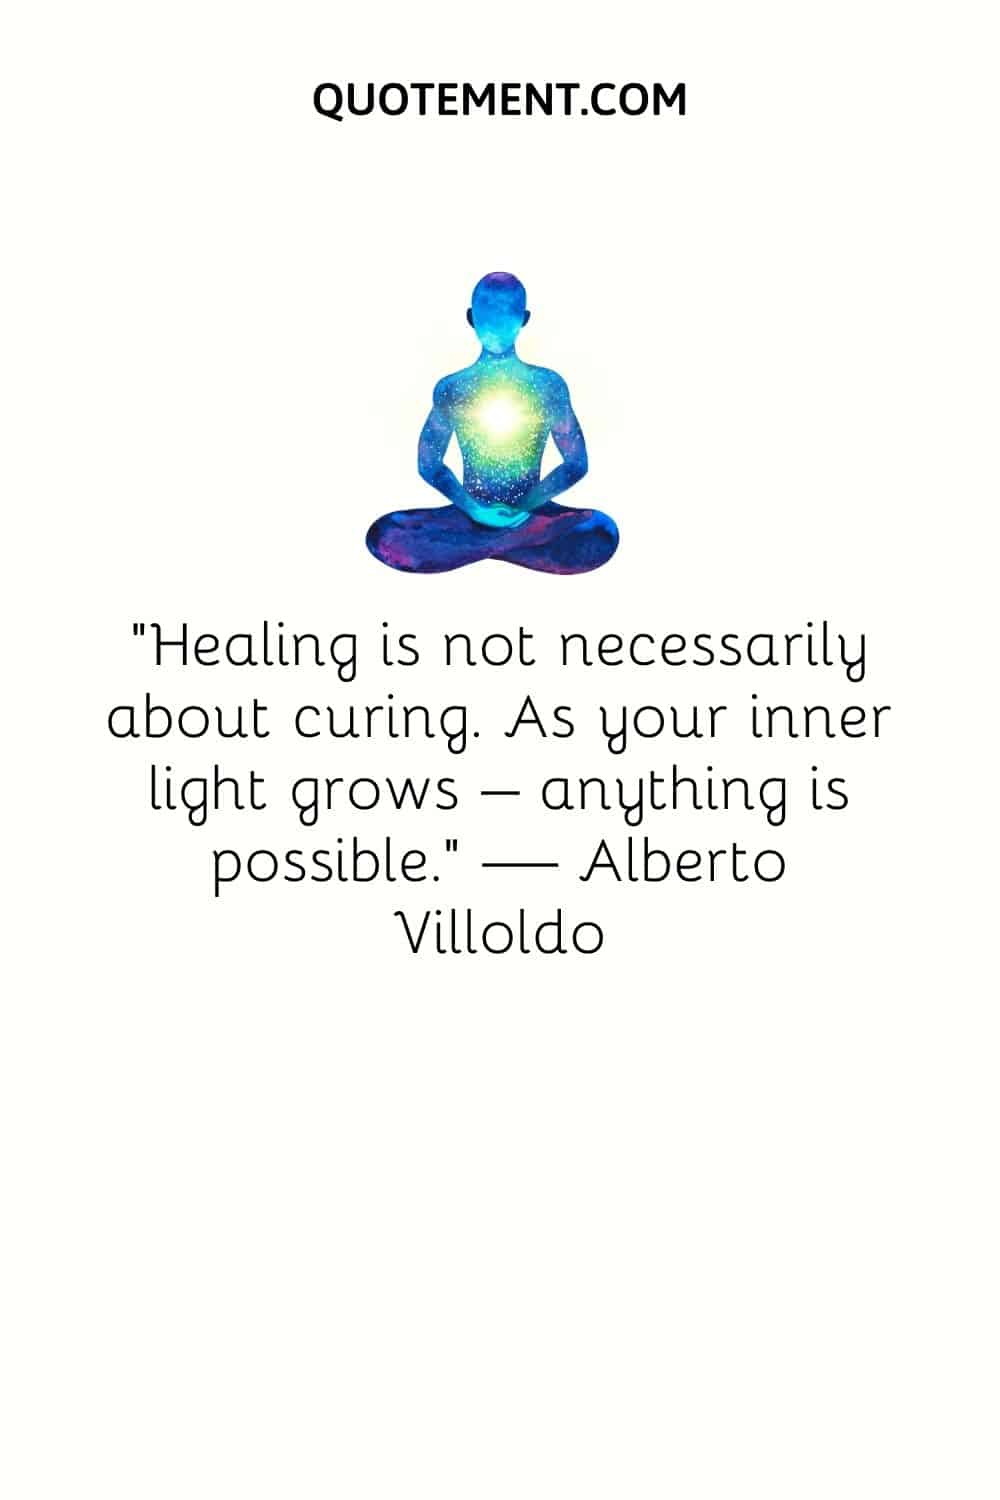 “Healing is not necessarily about curing. As your inner light grows – anything is possible.” — Alberto Villoldo